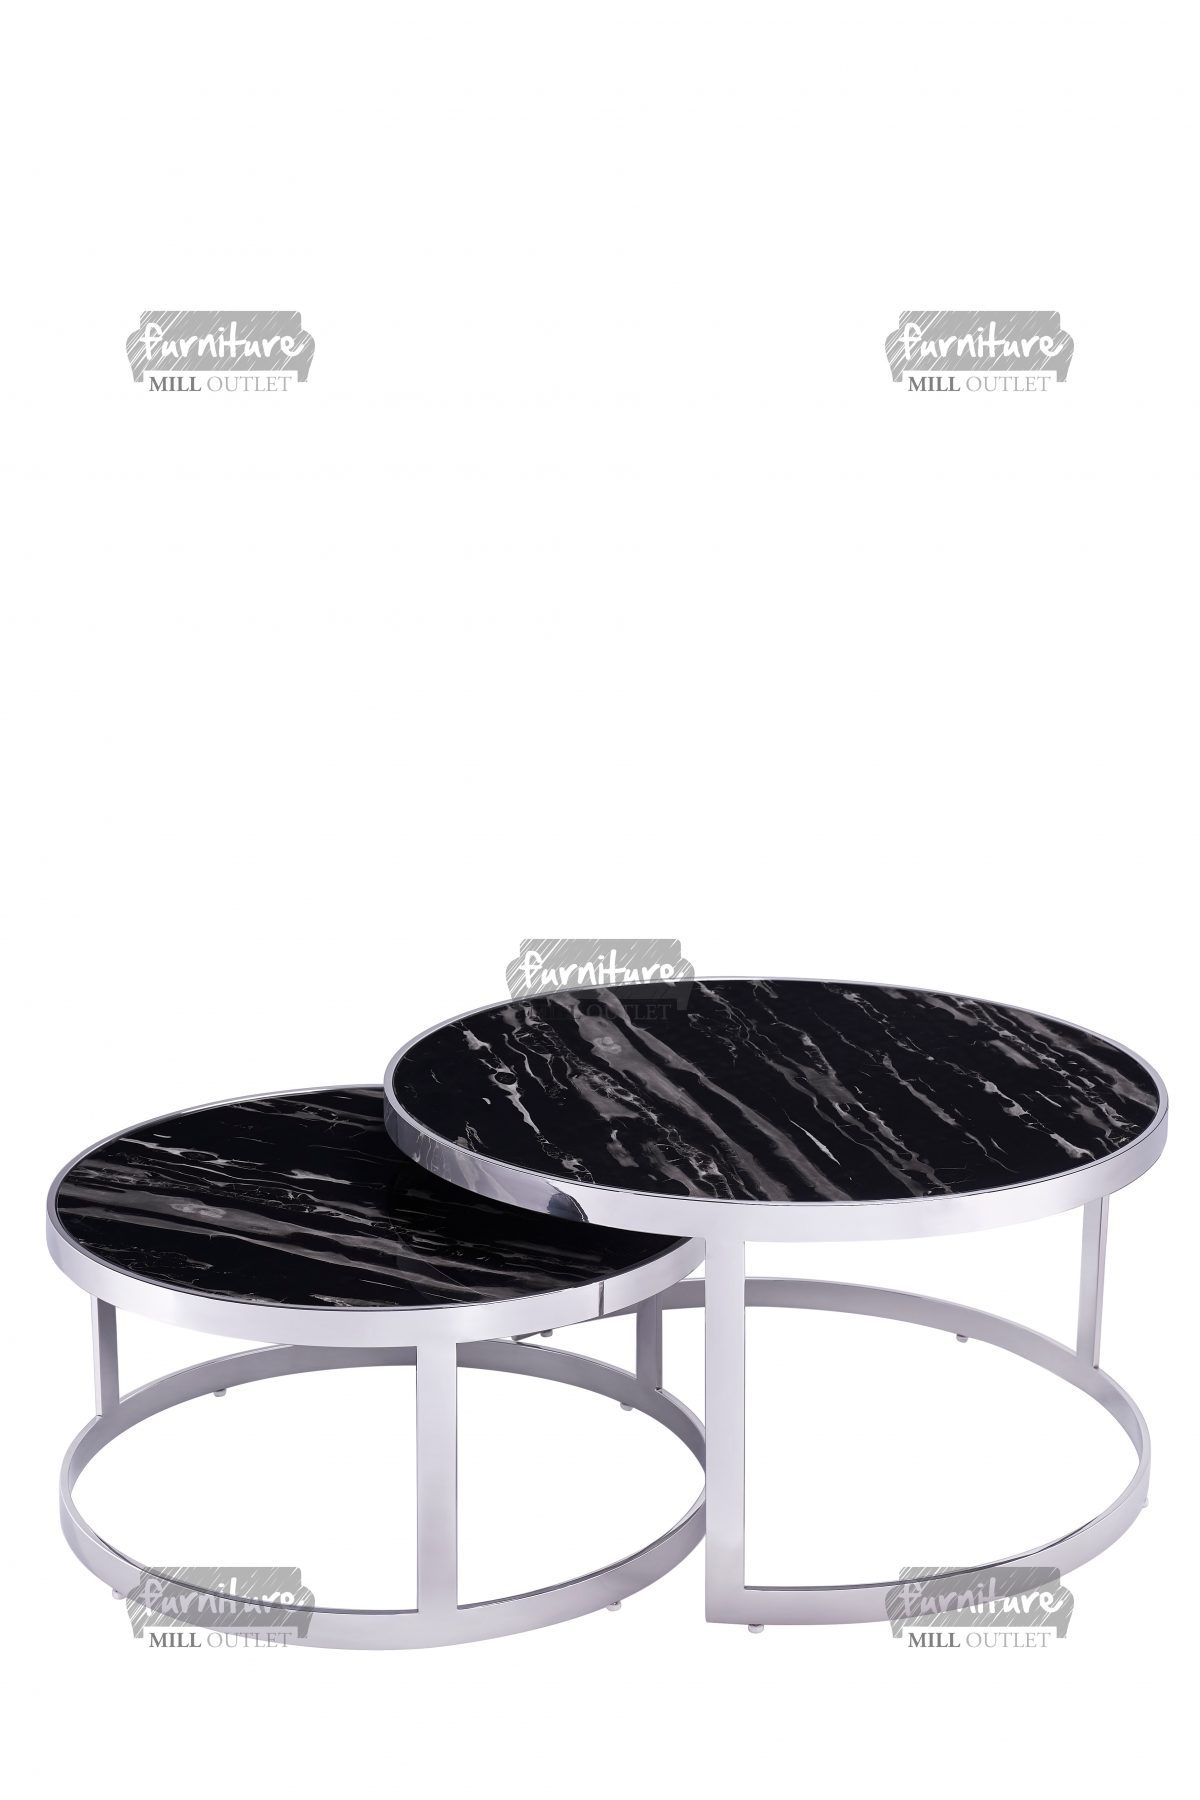 Bella Round Marble Nesting Coffee Table Set of 2 | Furniture Mill Outlet